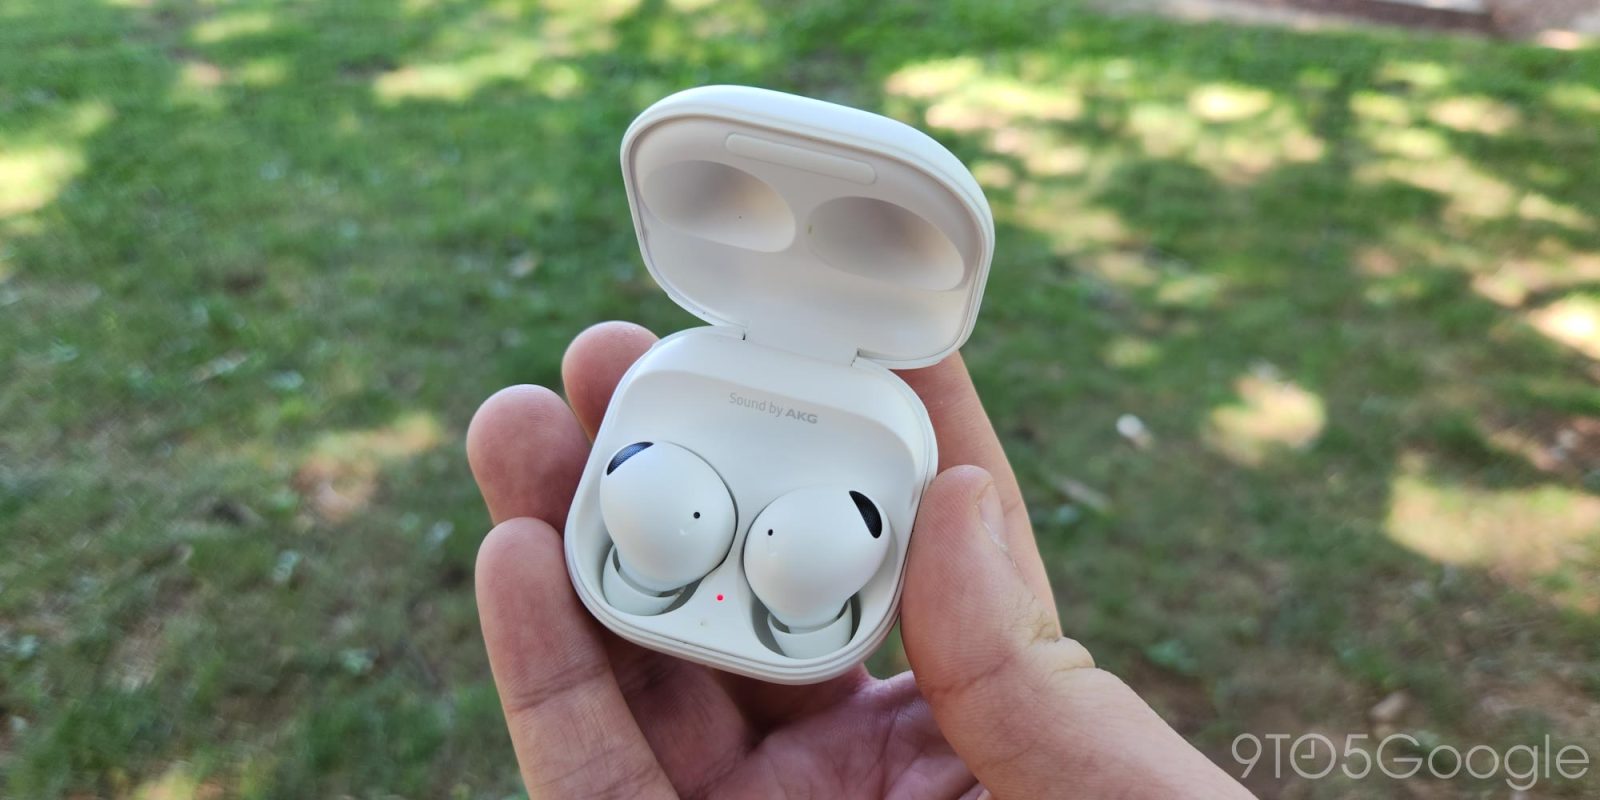 Samsung Galaxy Buds 2 Pro hands-on: The perfect buds?